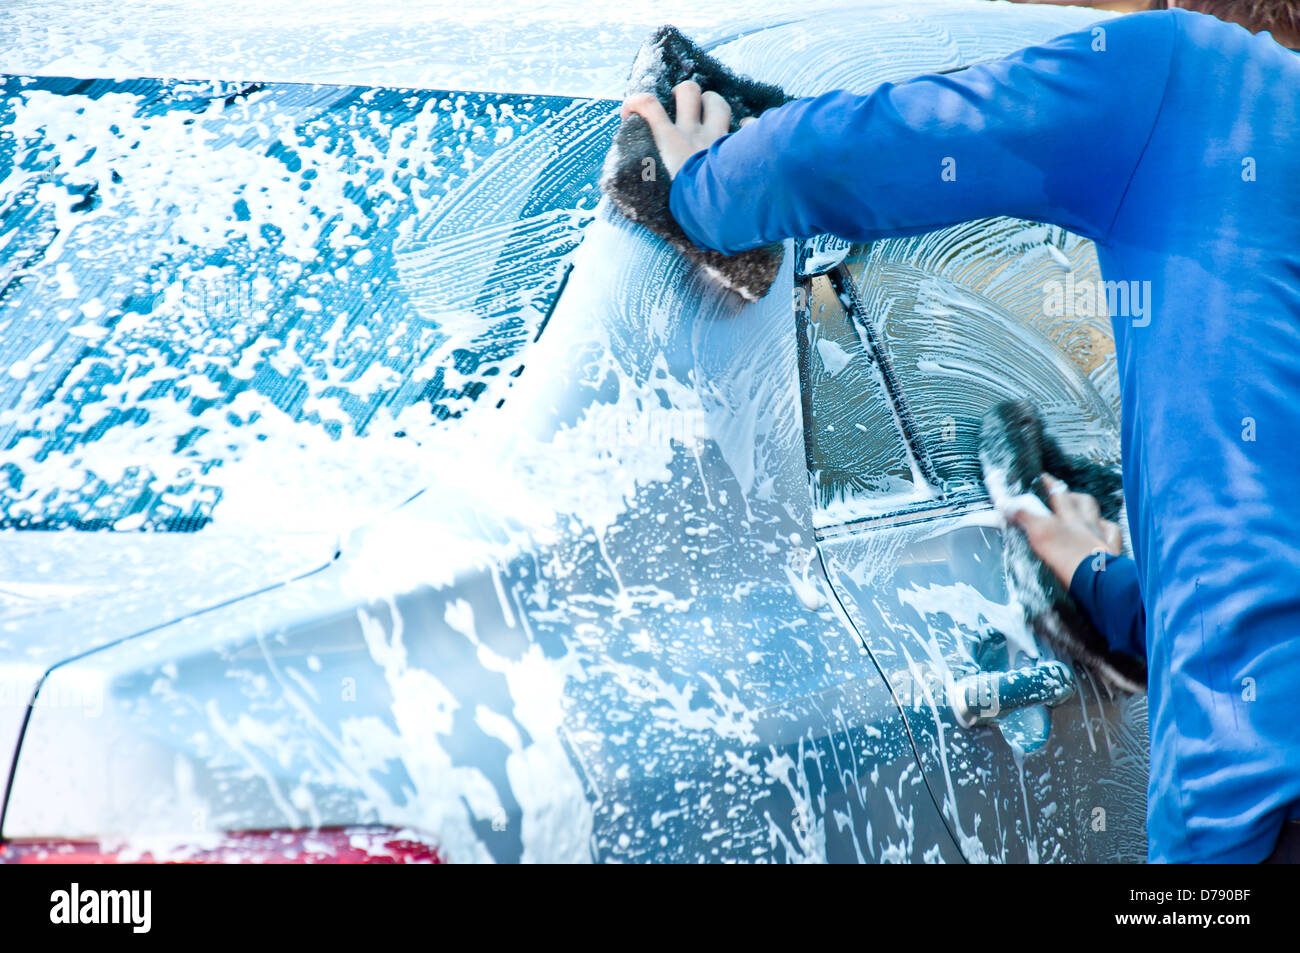 cleaning car by clean car care Stock Photo